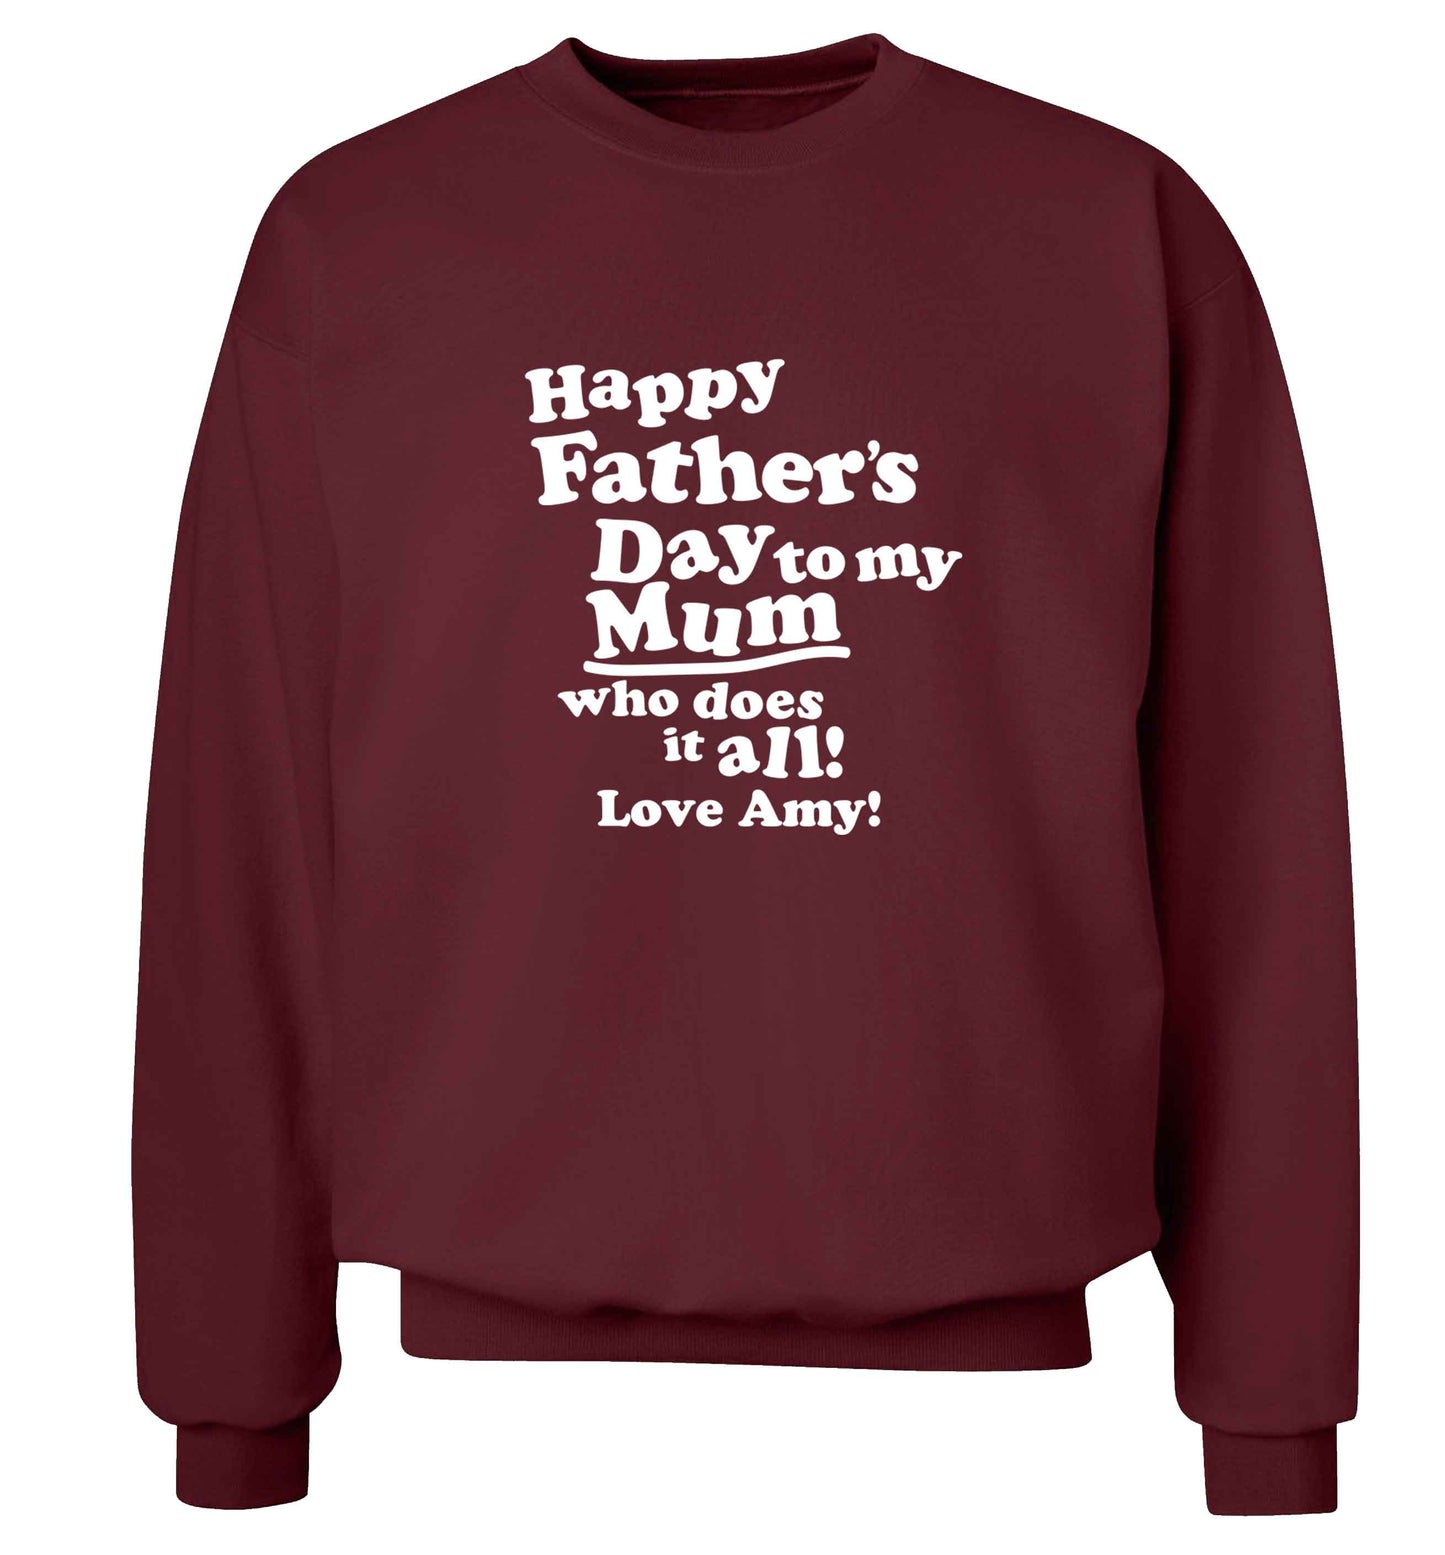 Happy Father's day to my mum who does it all adult's unisex maroon sweater 2XL